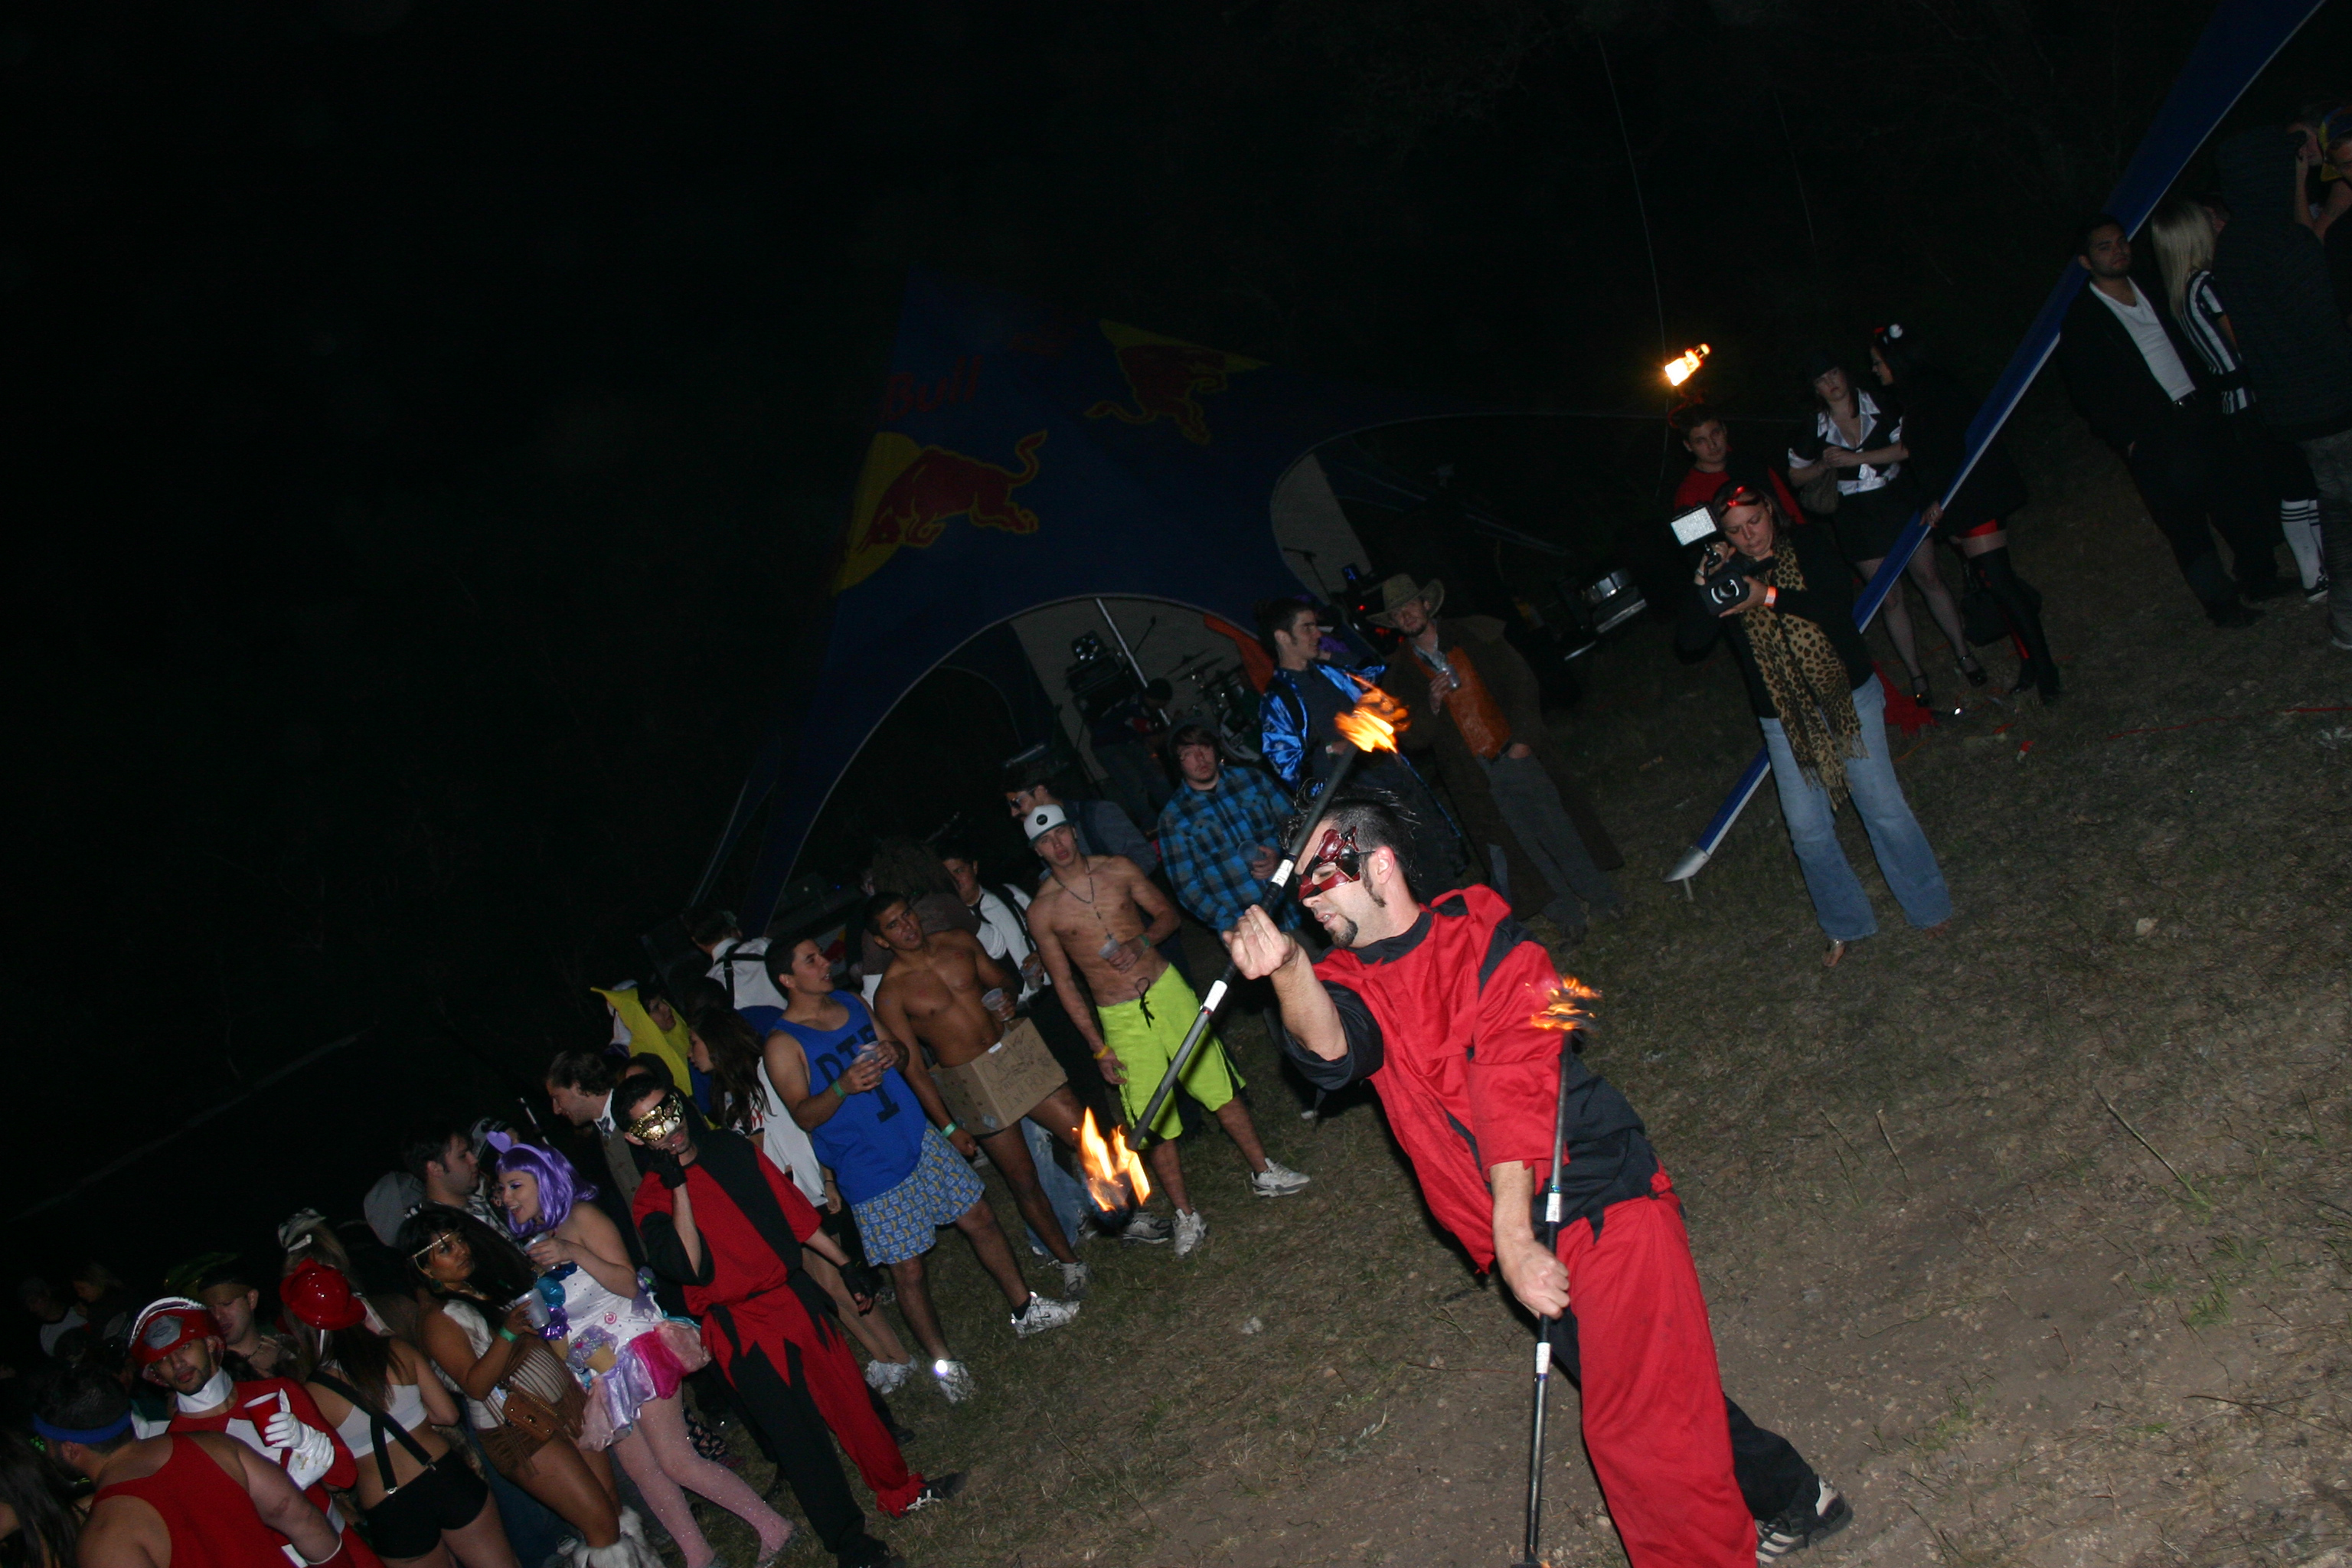 Producer Robin Blesch filming fire-dancers at Halloween on Haunted Hill in San Antonio before WPFG Studios artist YaBoi Lavish performed for almost 1000 party guests.